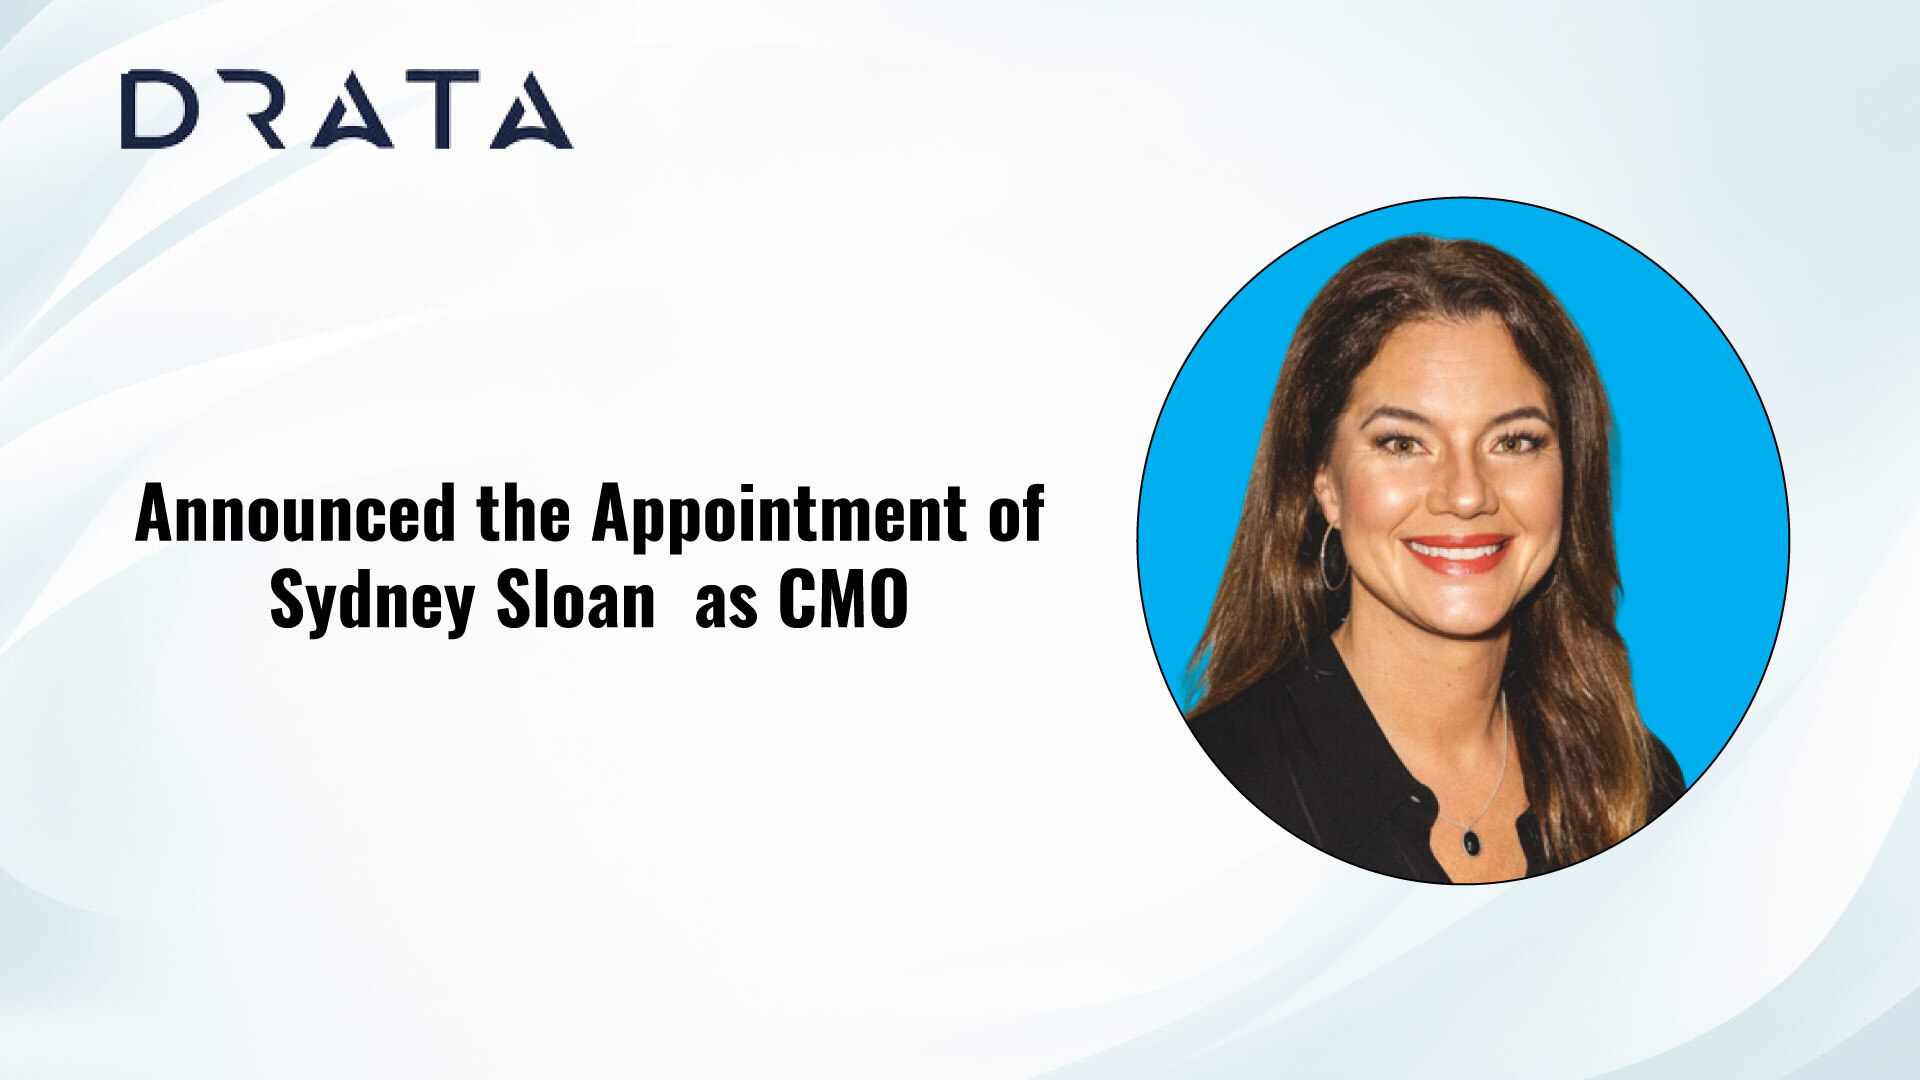 Sydney Sloan Joins Drata as Chief Marketing Officer